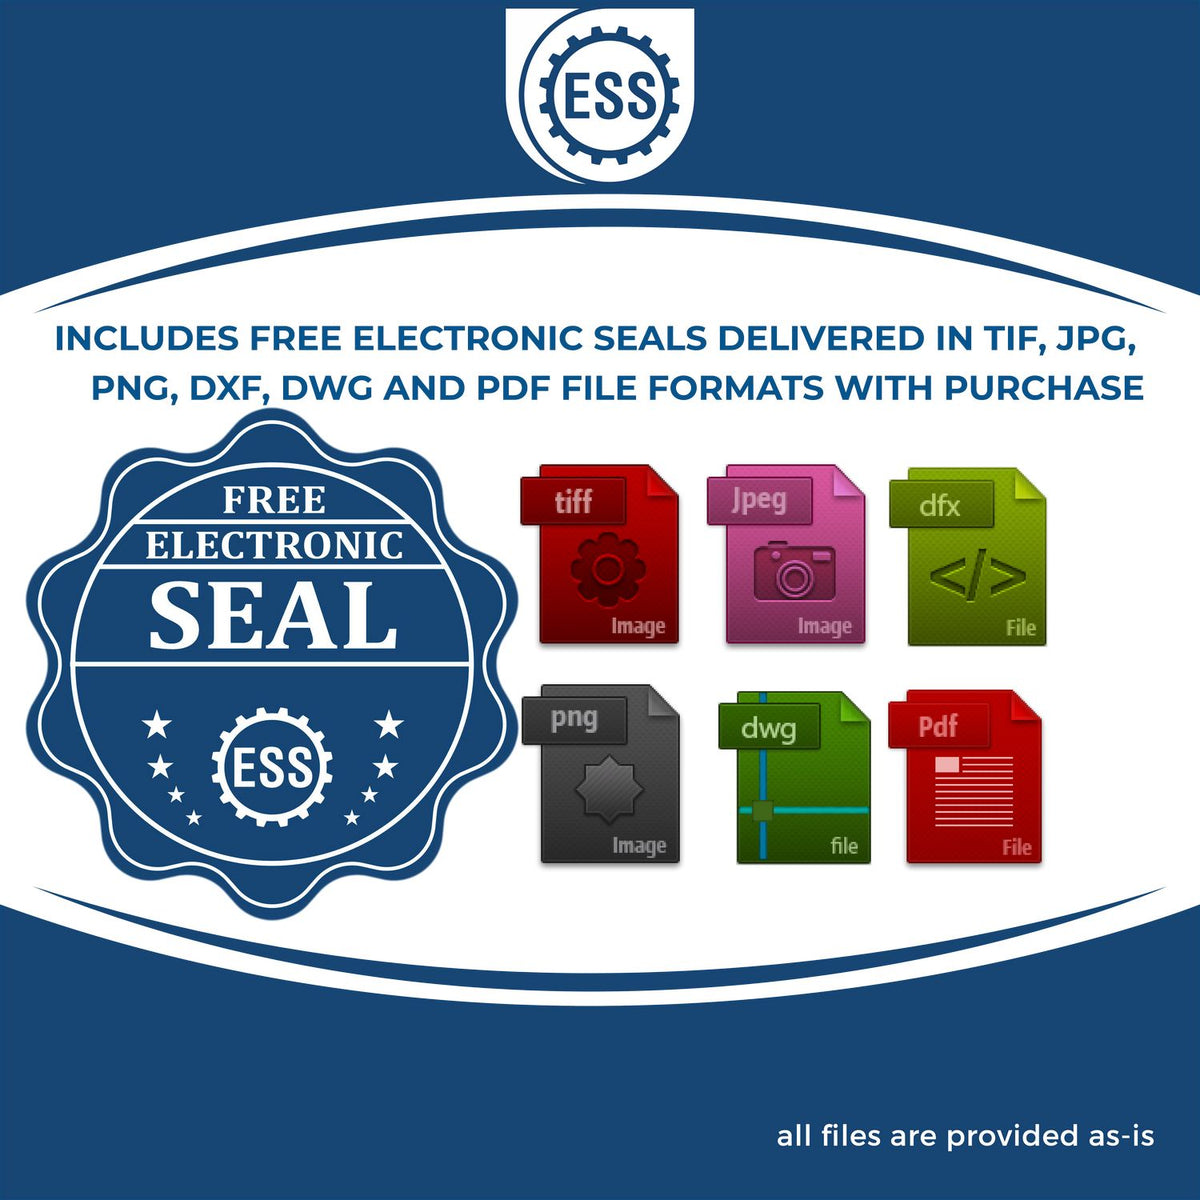 An infographic for the free electronic seal for the Gift Maine Landscape Architect Seal illustrating the different file type icons such as DXF, DWG, TIF, JPG and PNG.